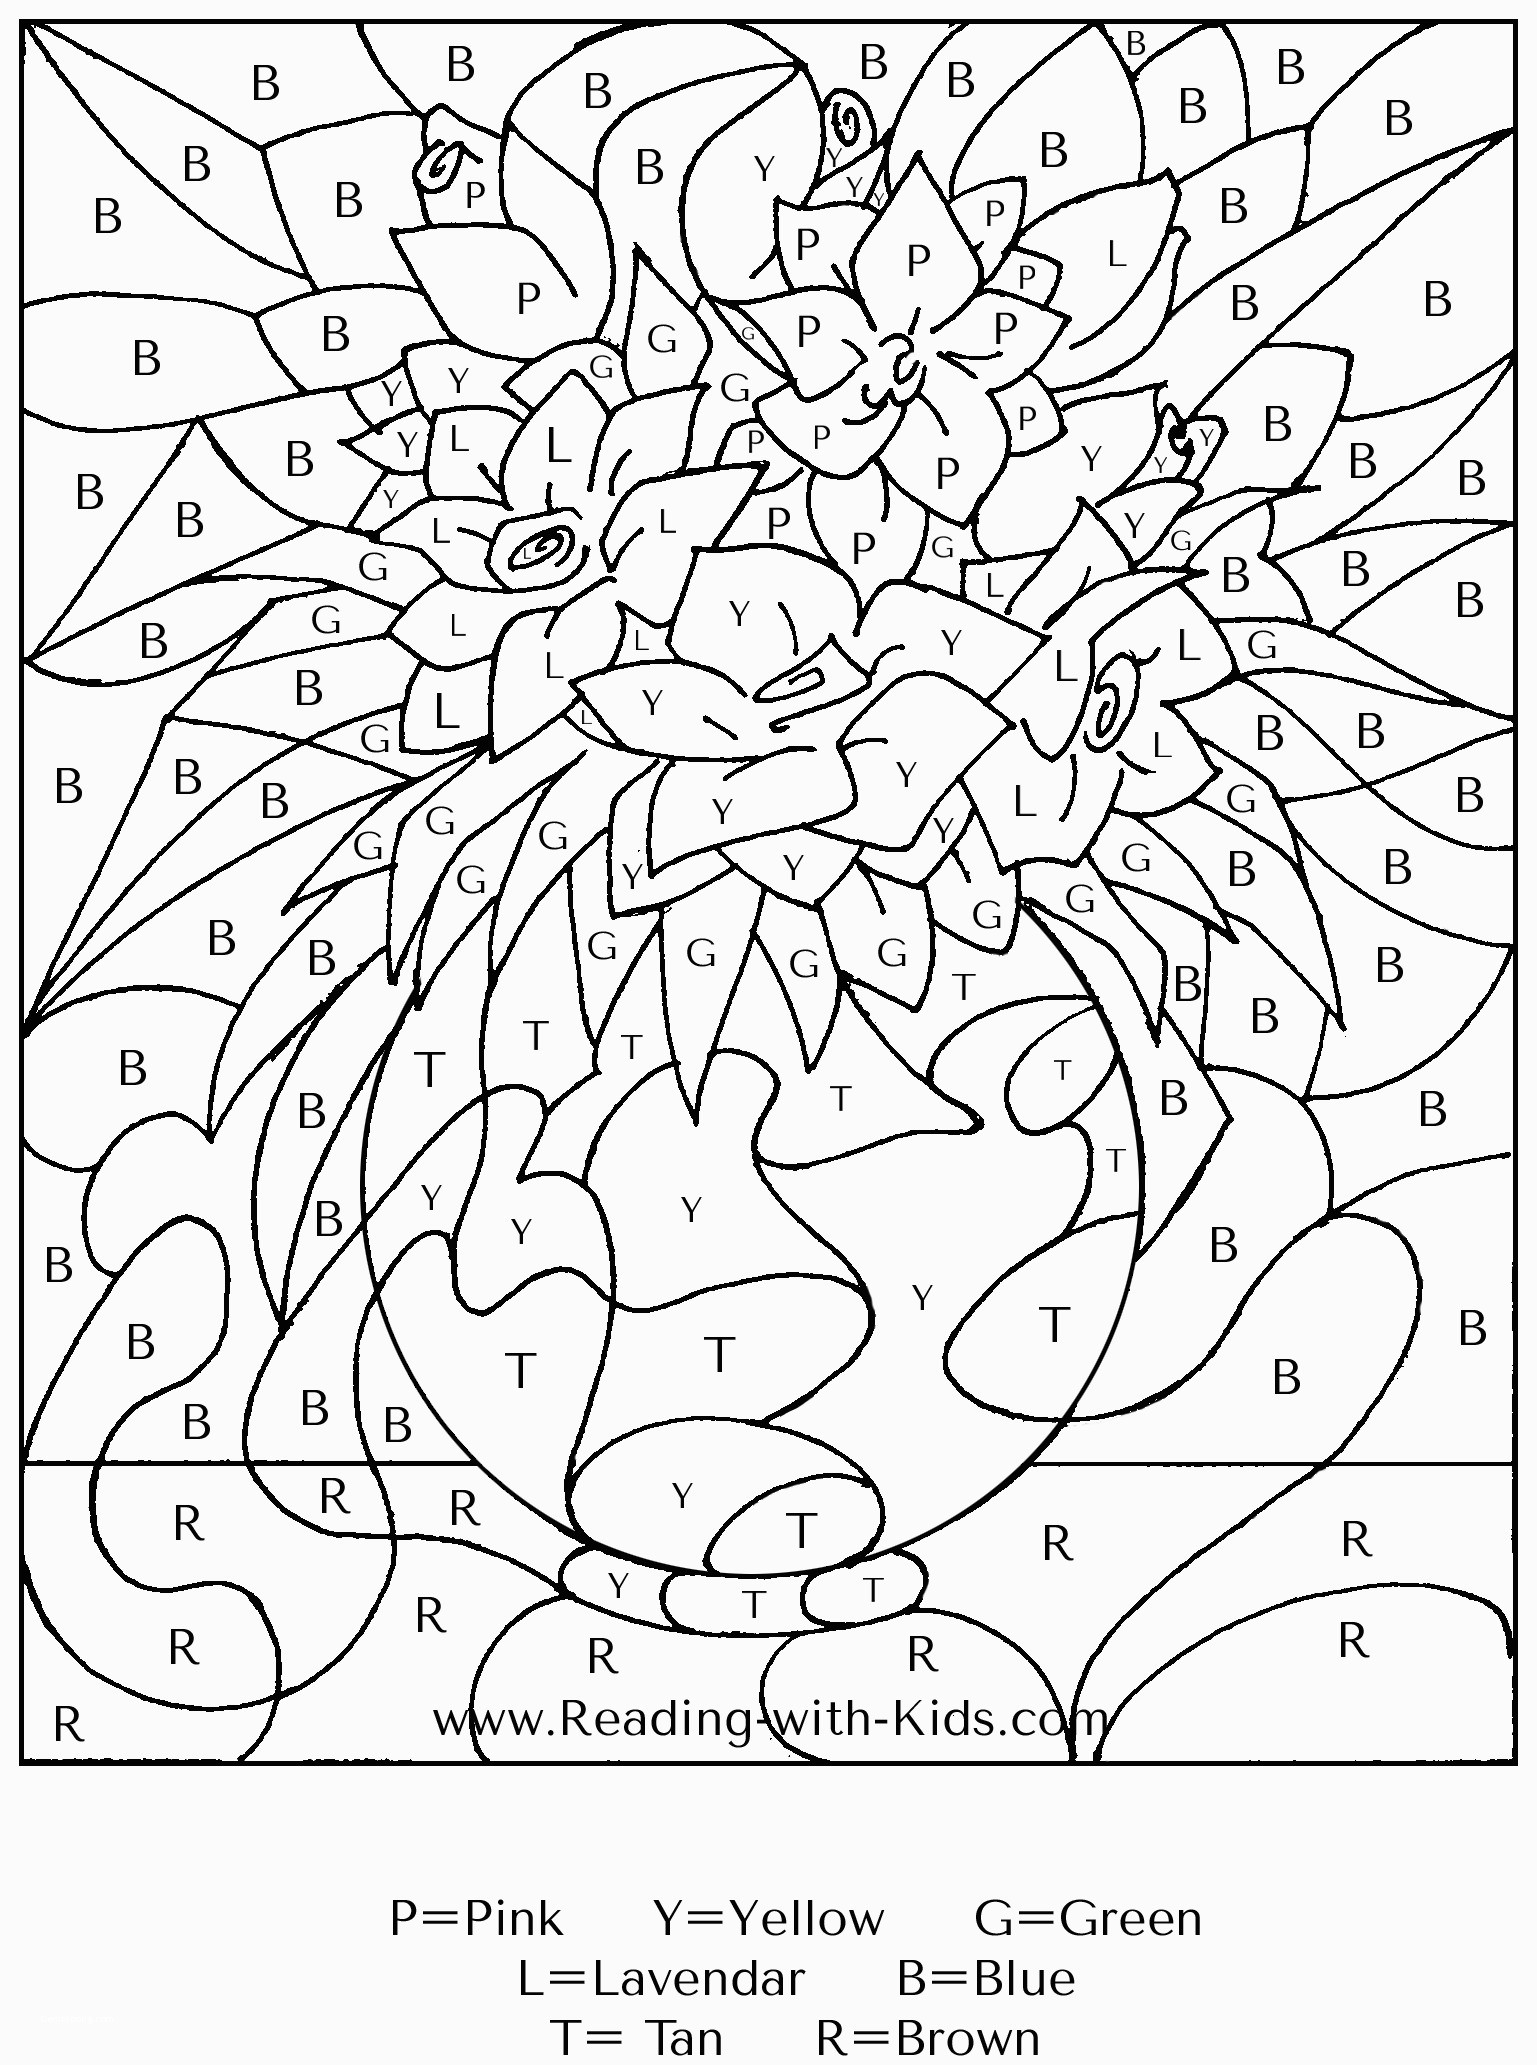 Stunning Coloring Pages Fors With Numbers Image Ideas Free